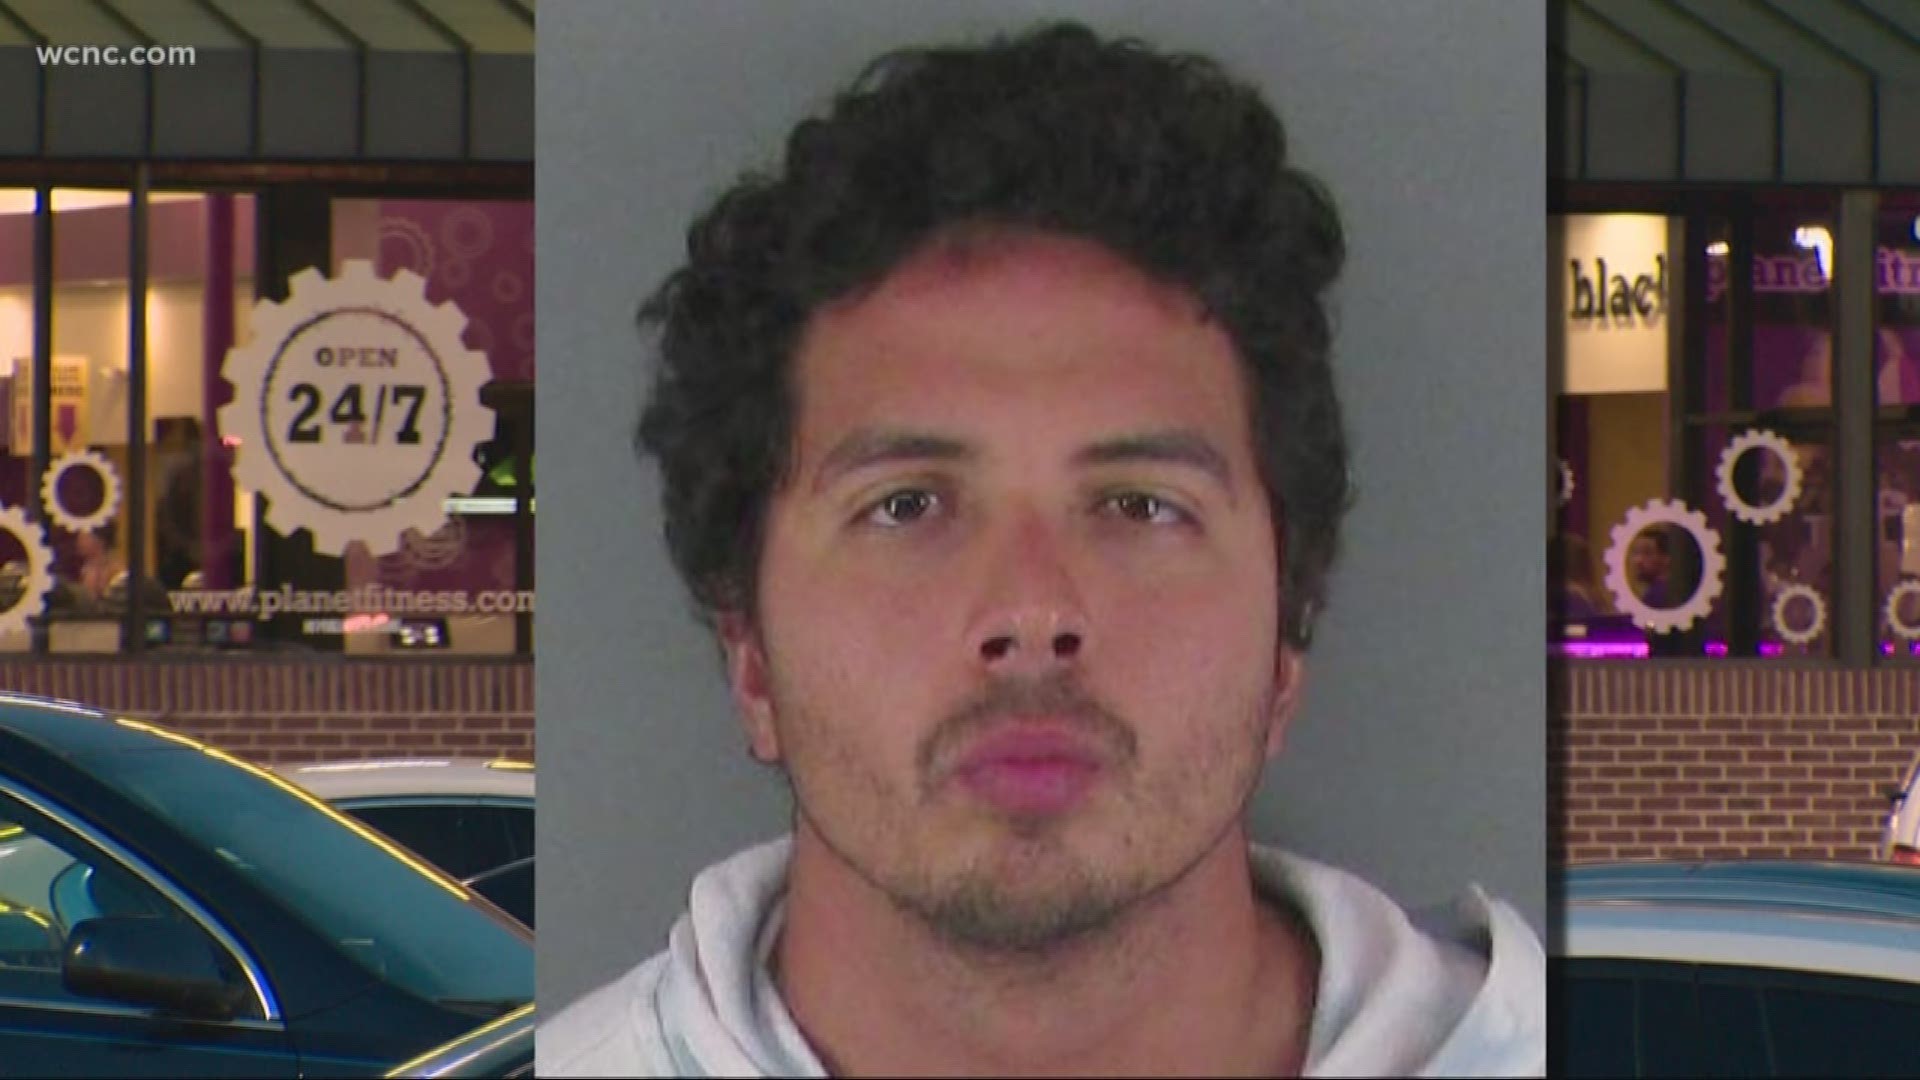 Man accused of trying to strangle woman outside popular gym